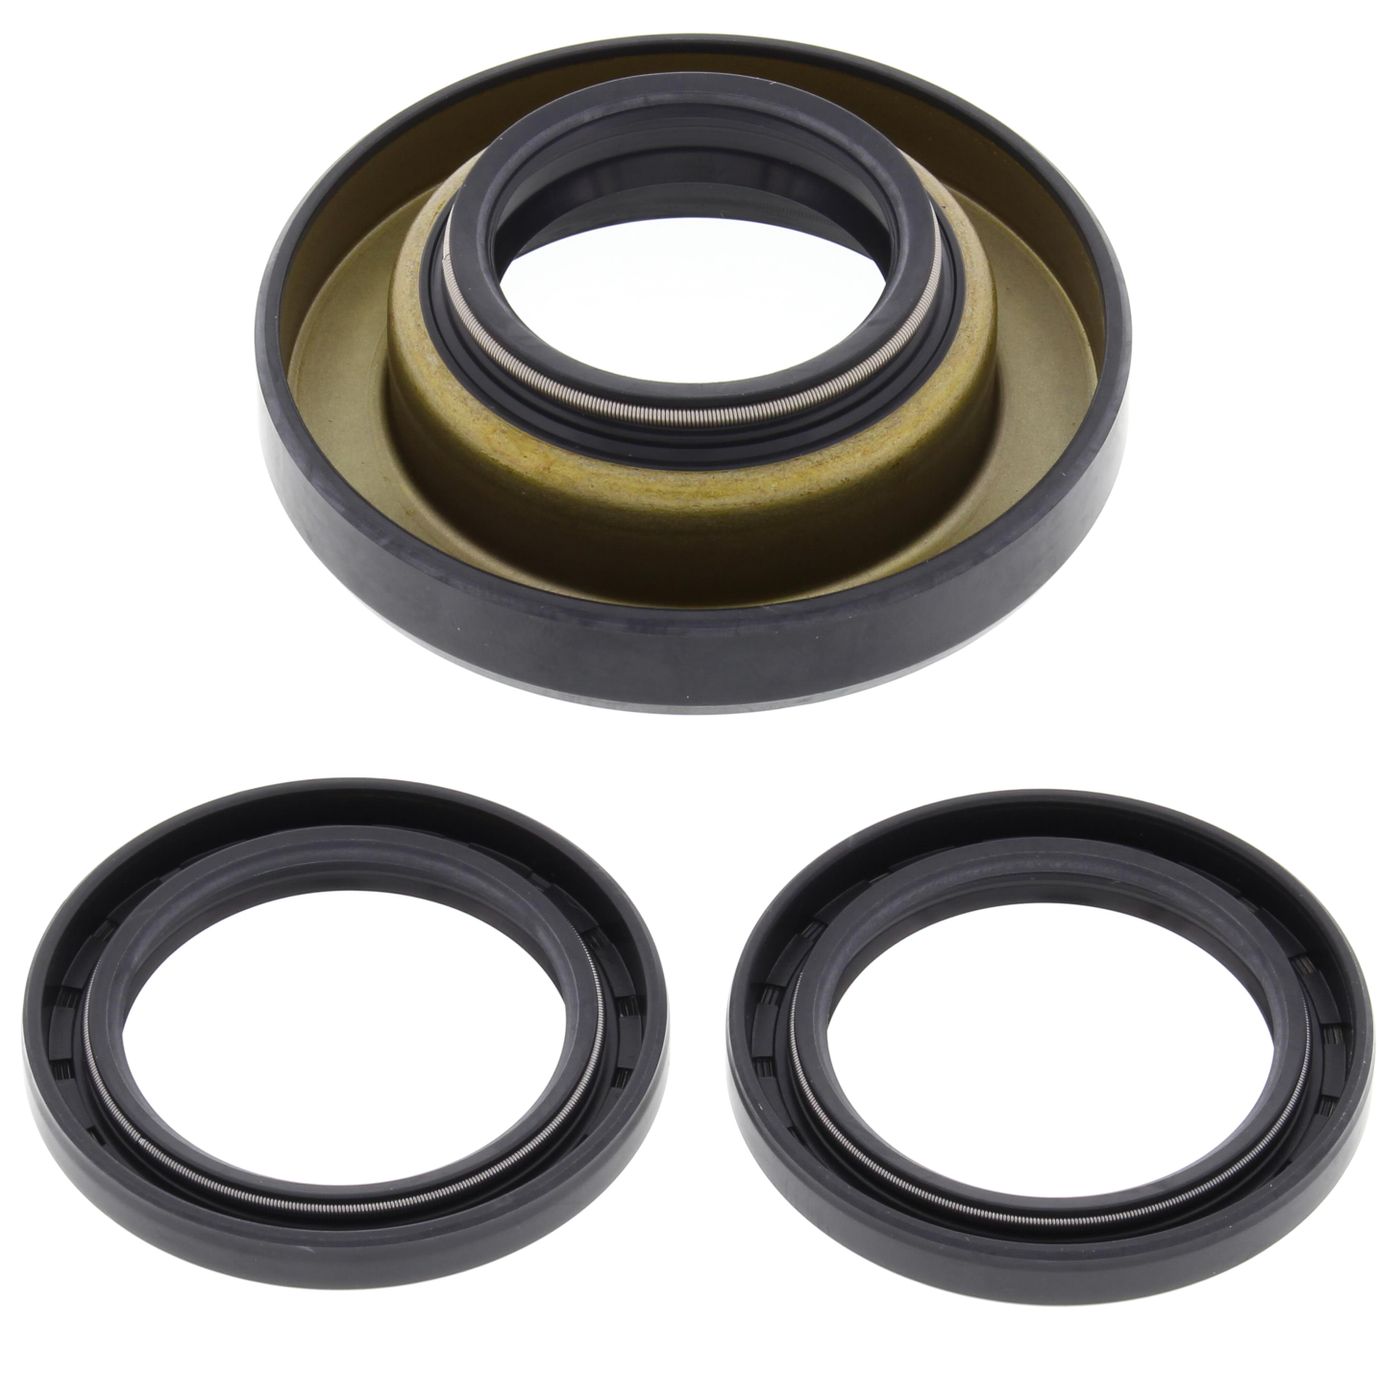 Wrp Diff Seal Kits - WRP252013-5 image